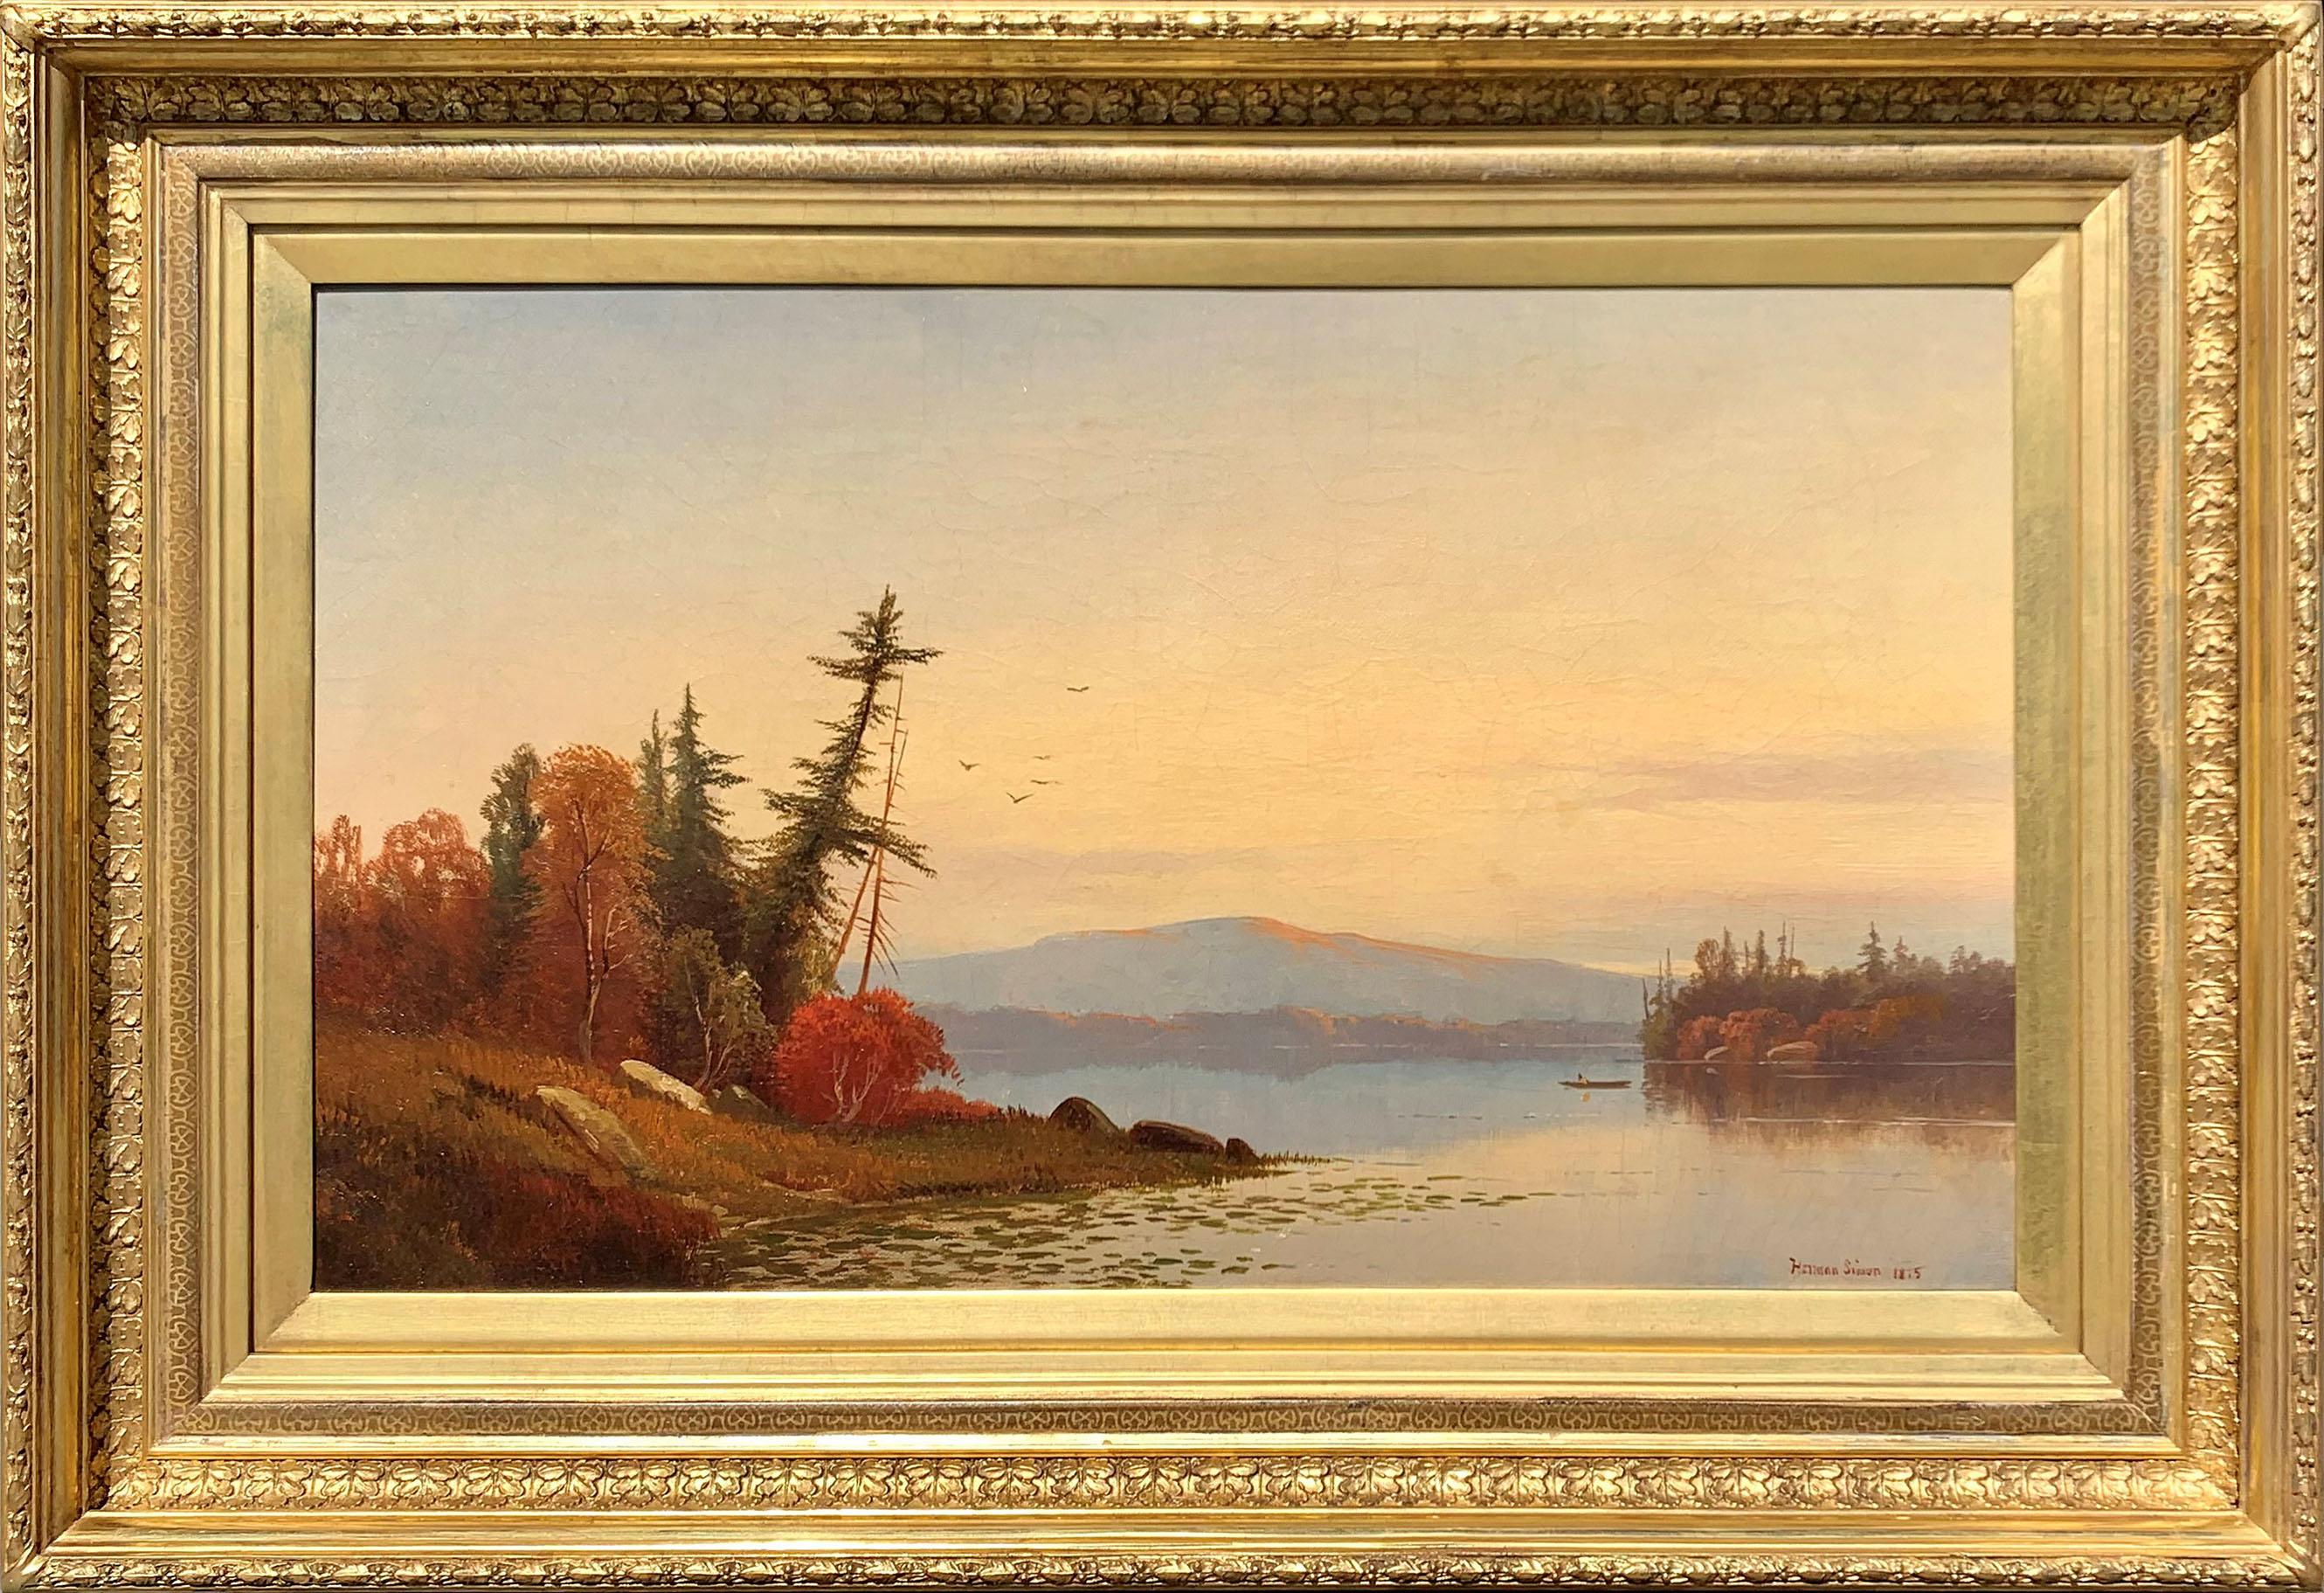 Painted by Hudson River School artist Hermann Simon (1846-1895) , "Sunset on the Hudson River" is oil on canvas, measures 15 x 25 inches, and is signed and dated 1875 at the lower right. The work is framed in a period appropriate frame and ready to